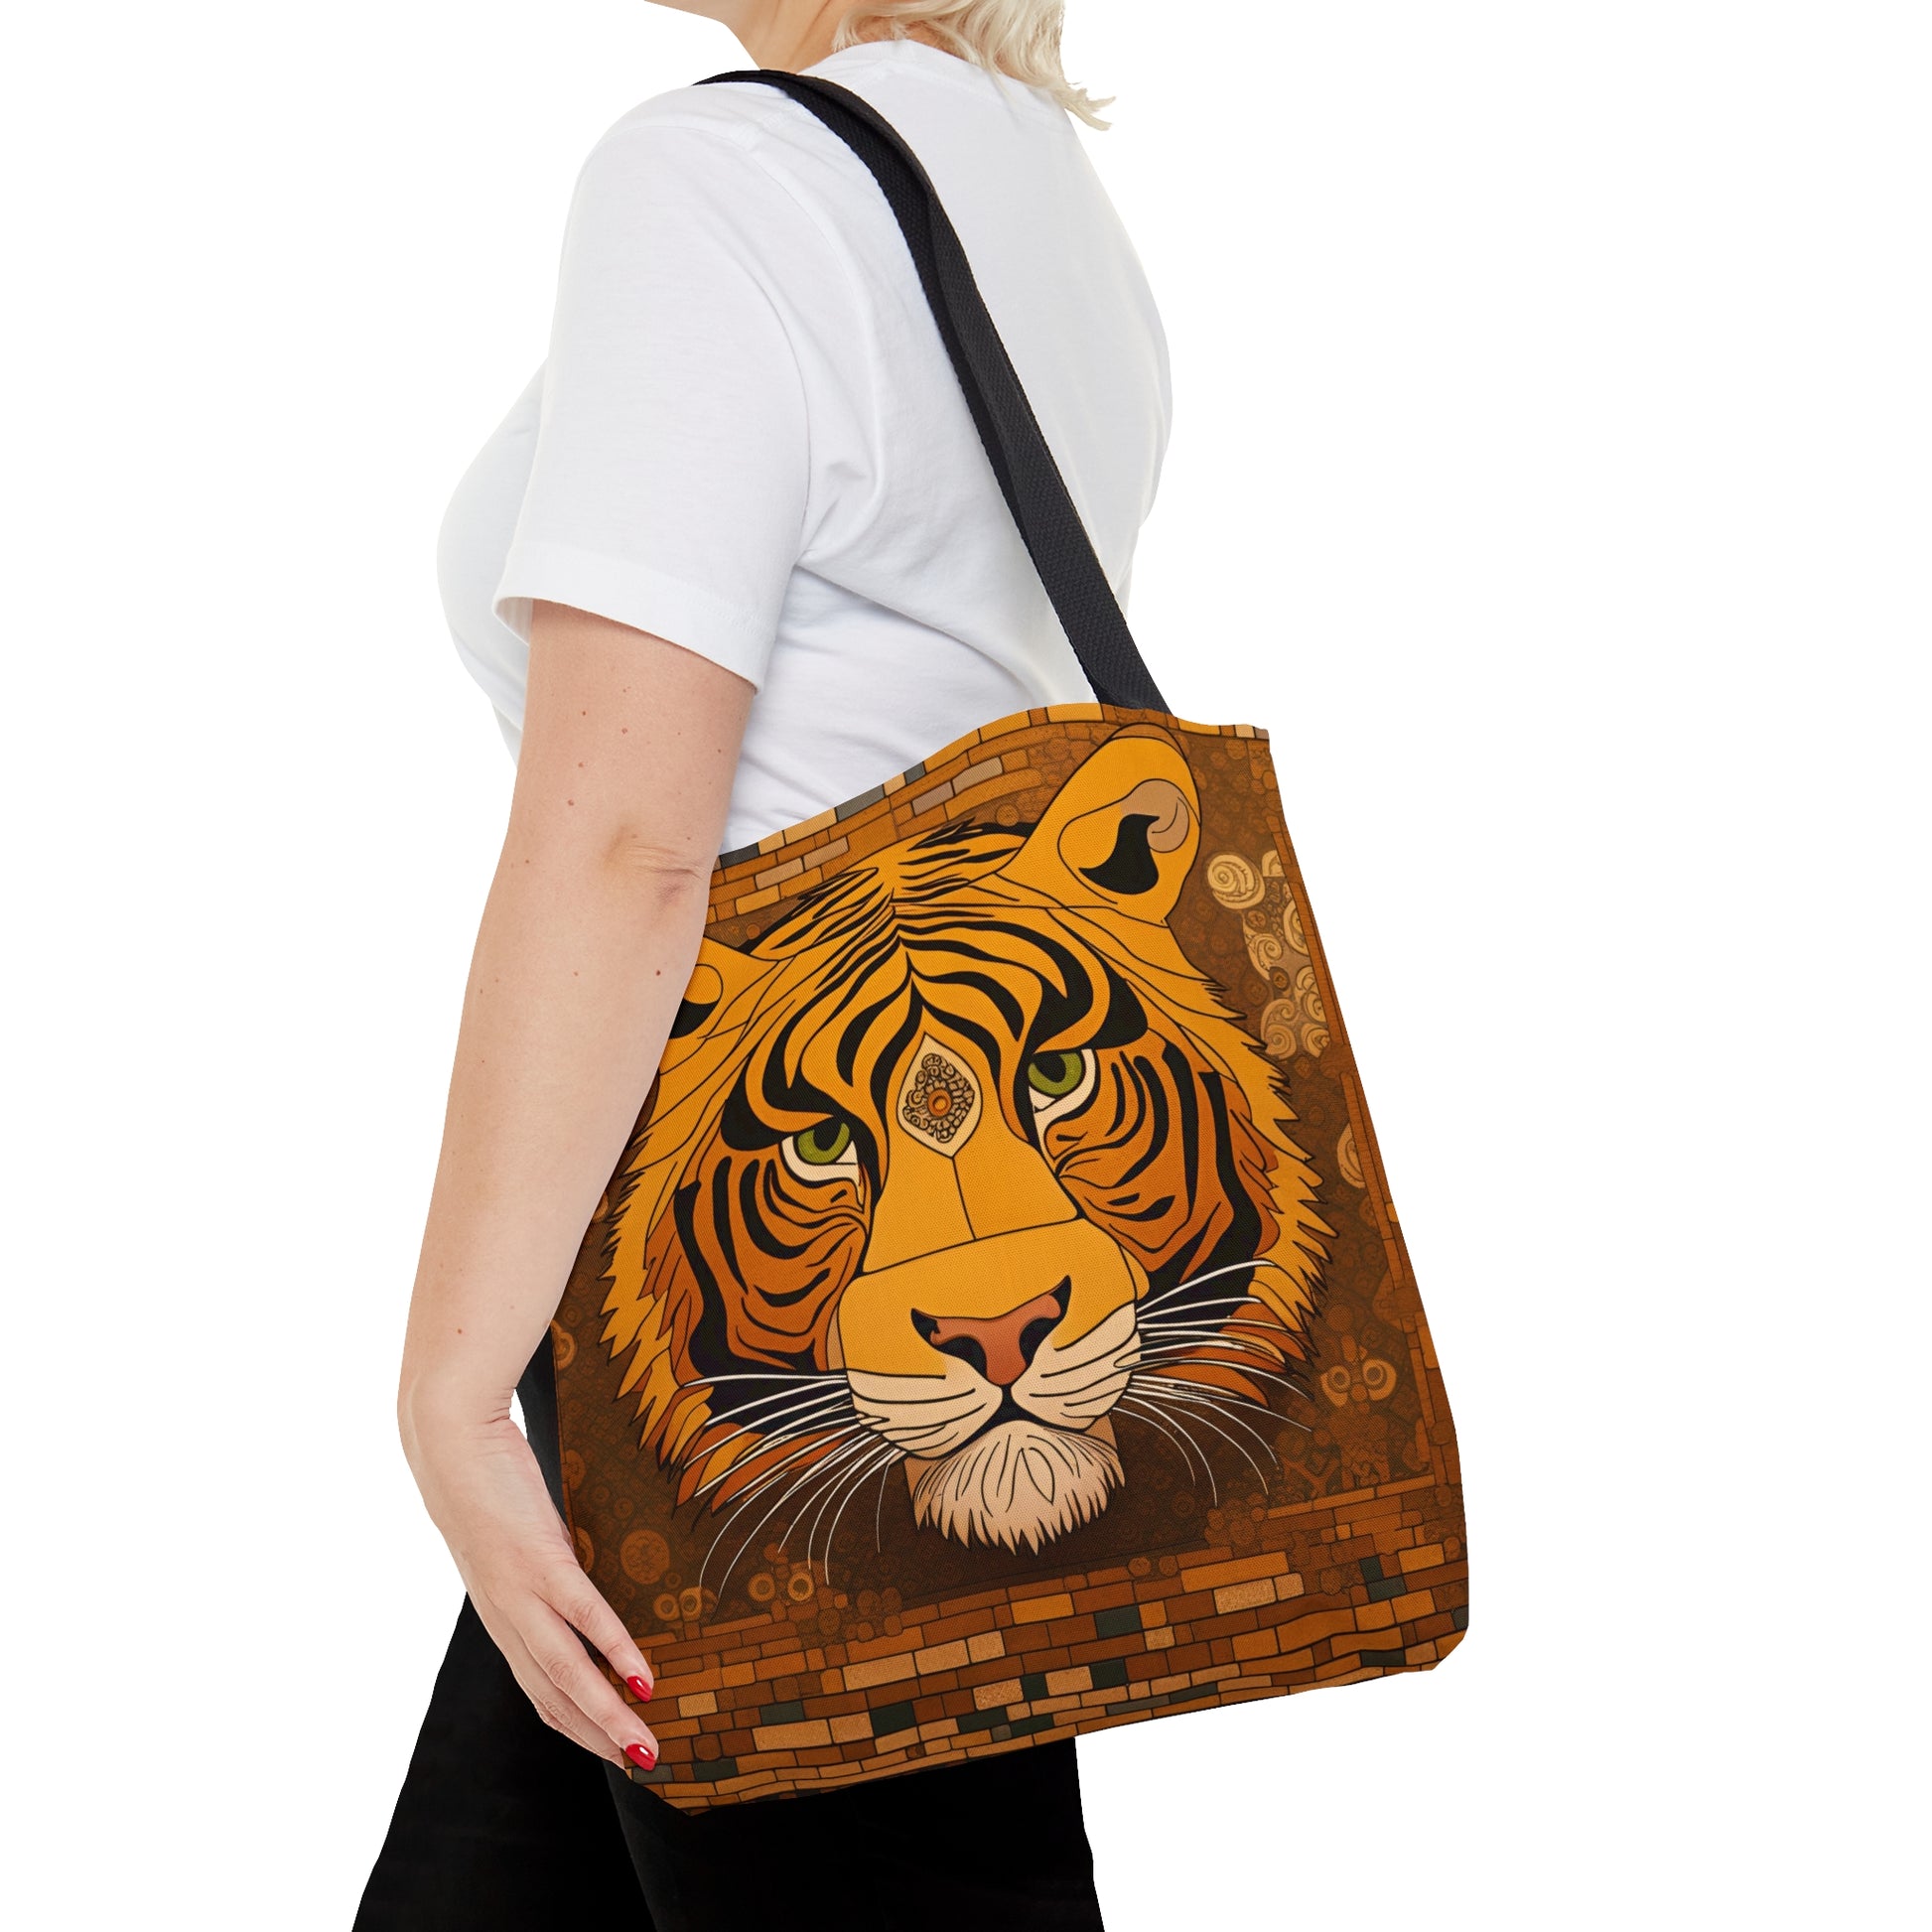 Tiger Head in the Style of Gustav Klimt Printed on Tote Bag medium with female model